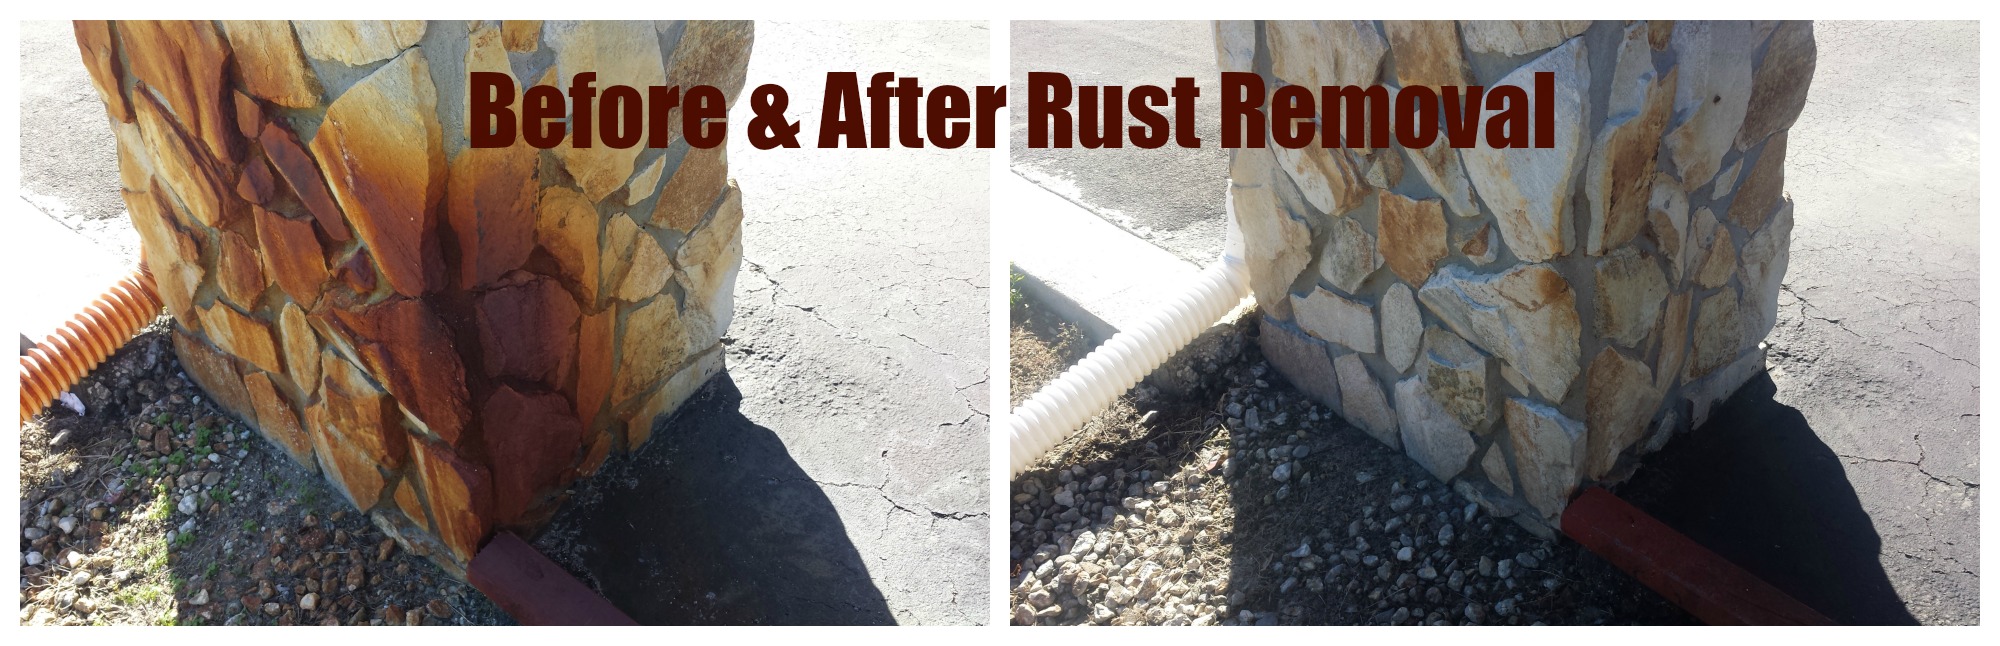  Rust Removal Before and After 